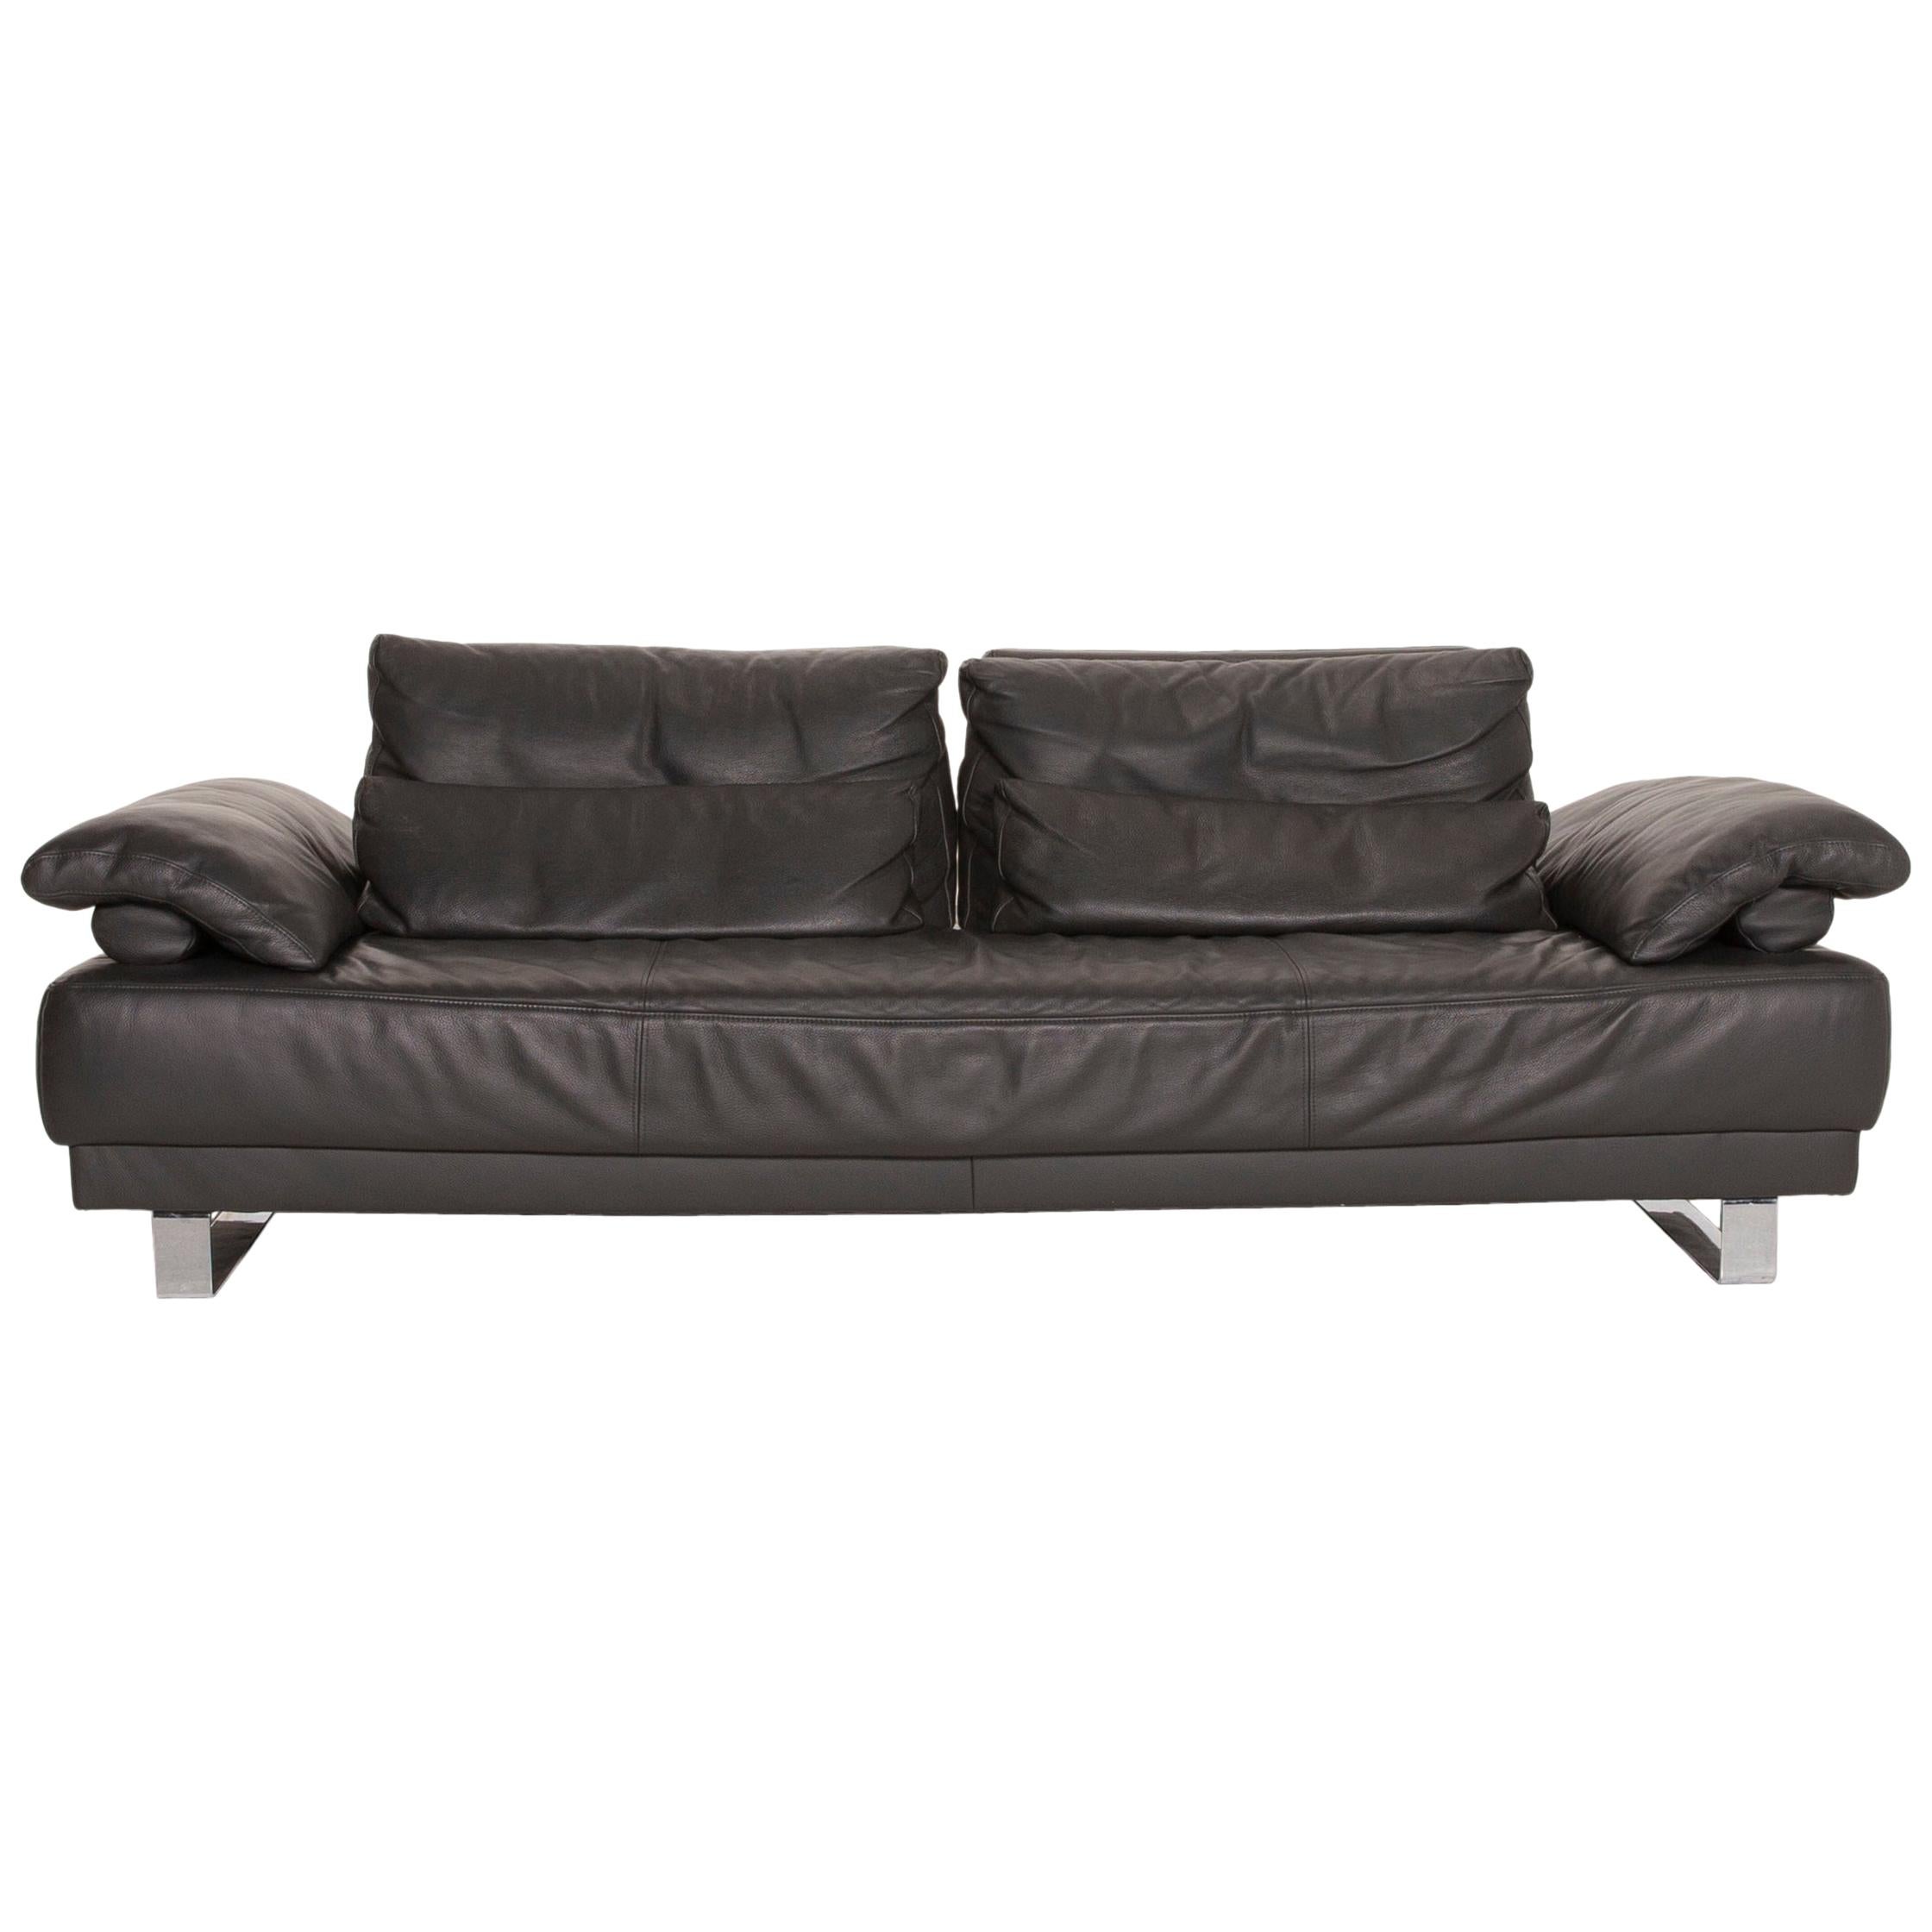 Ewald Schillig Leather Sofa Anthracite Gray Three-Seater Function Couch